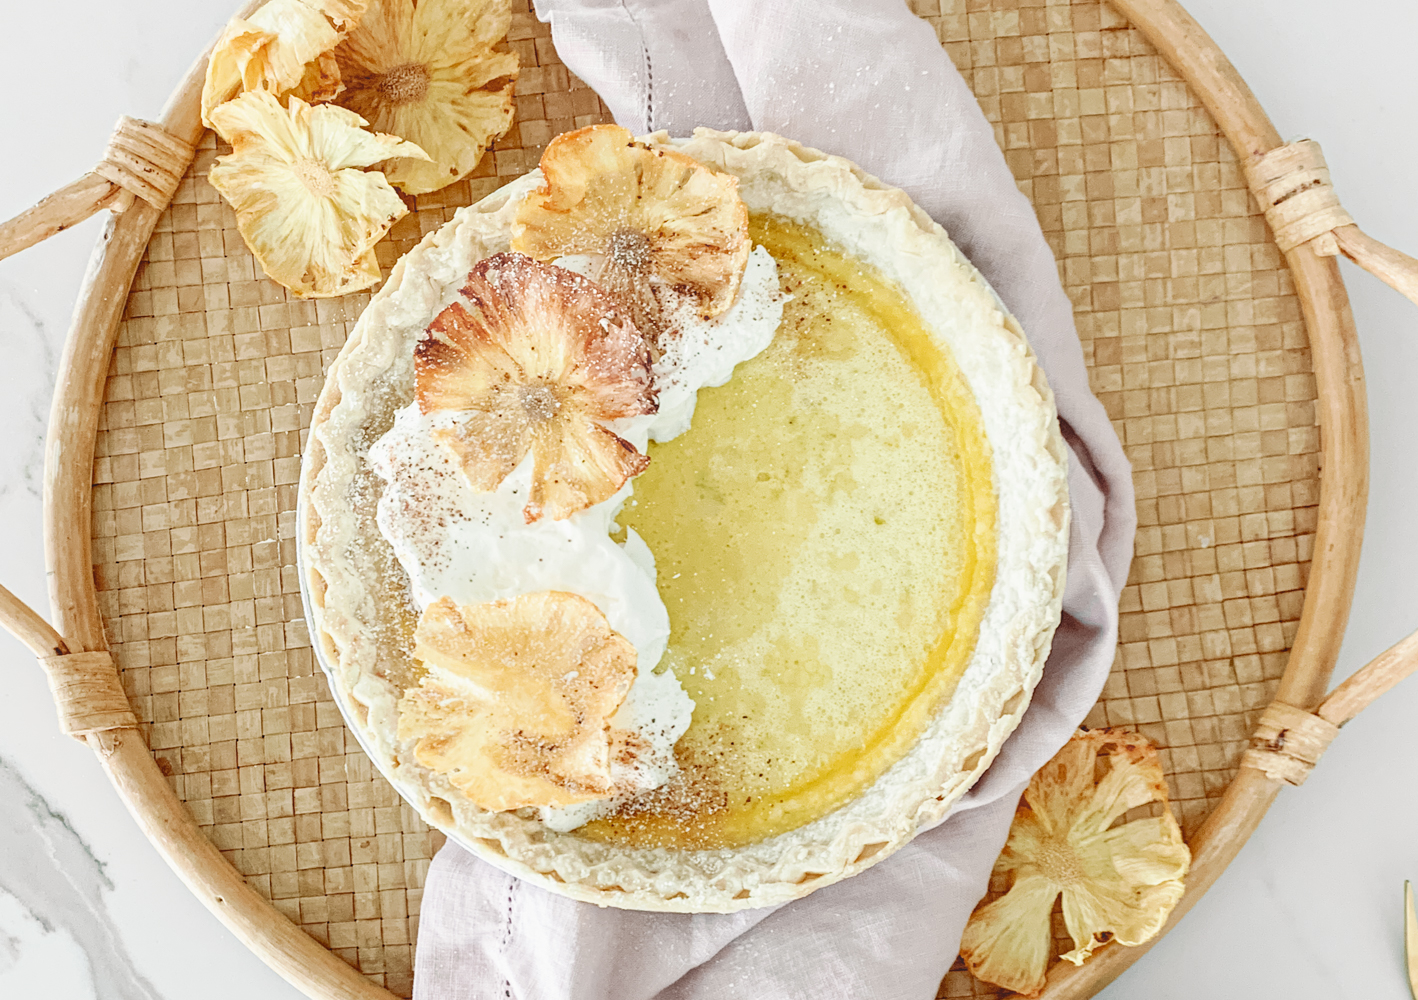 A Marigold Pineapple Coconut Pie With Pineapple Blossoms